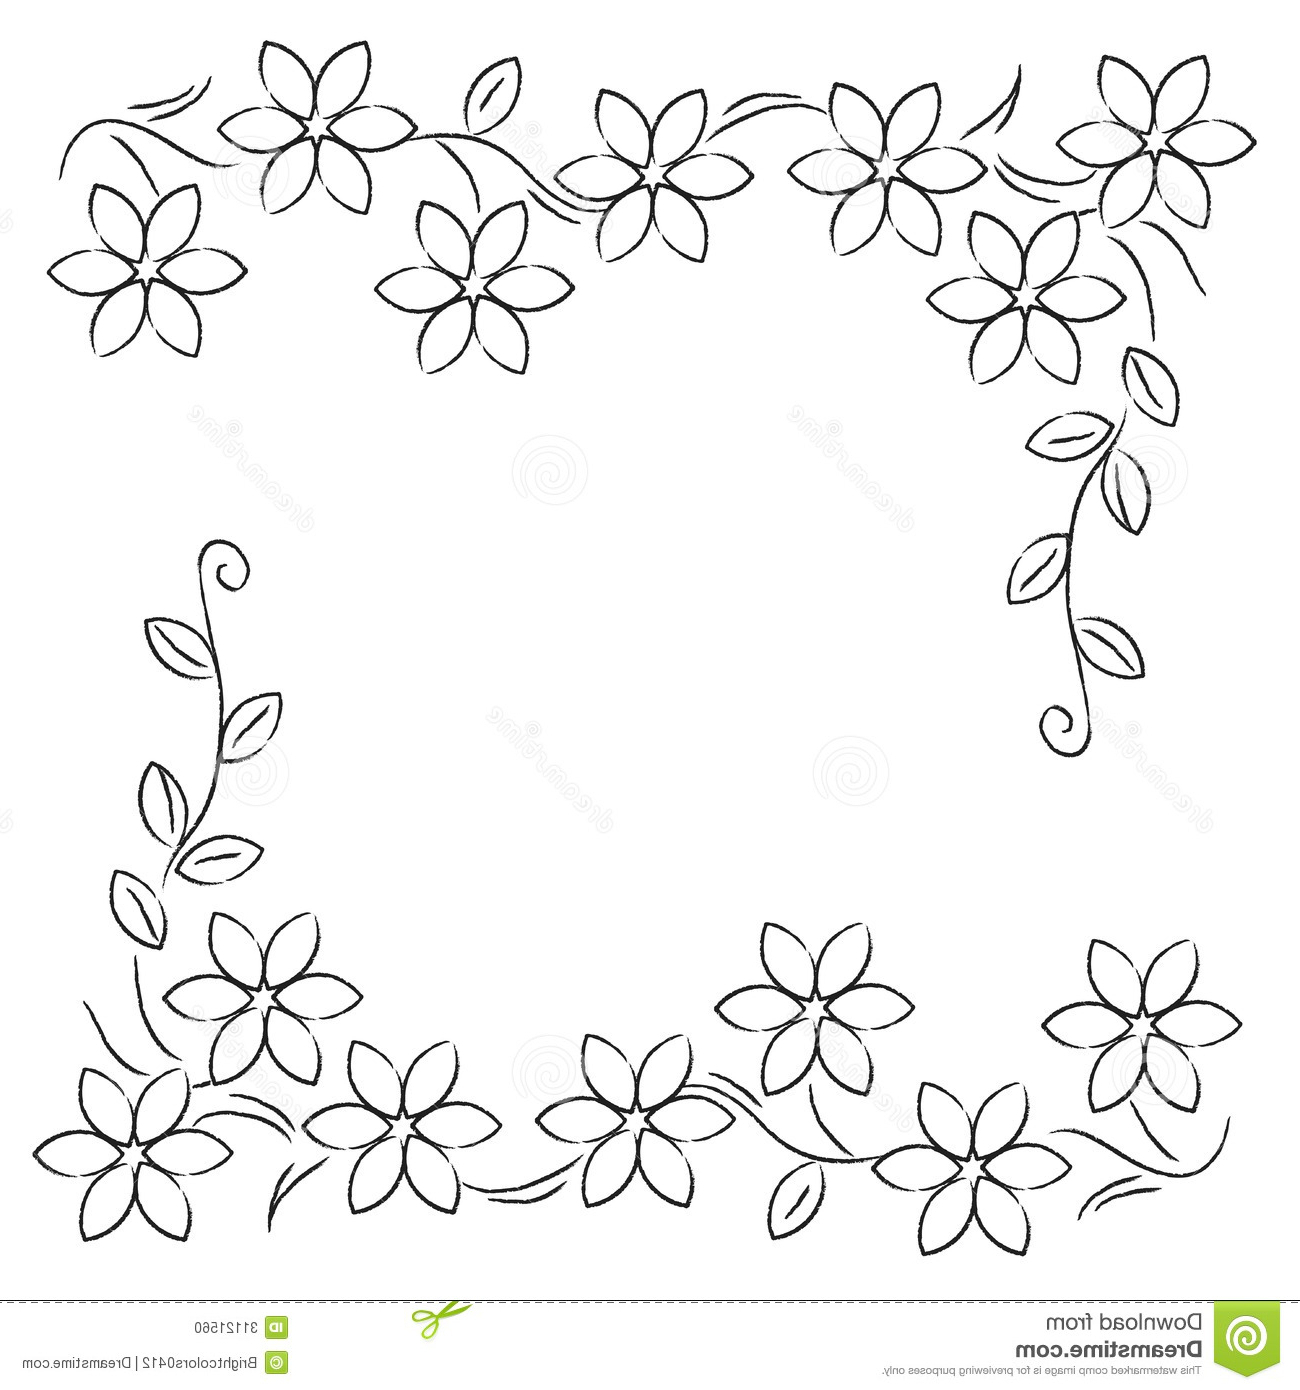 Featured image of post Sketch Floral Border Flower Design Drawing - ✓ free for commercial use ✓ high quality images.